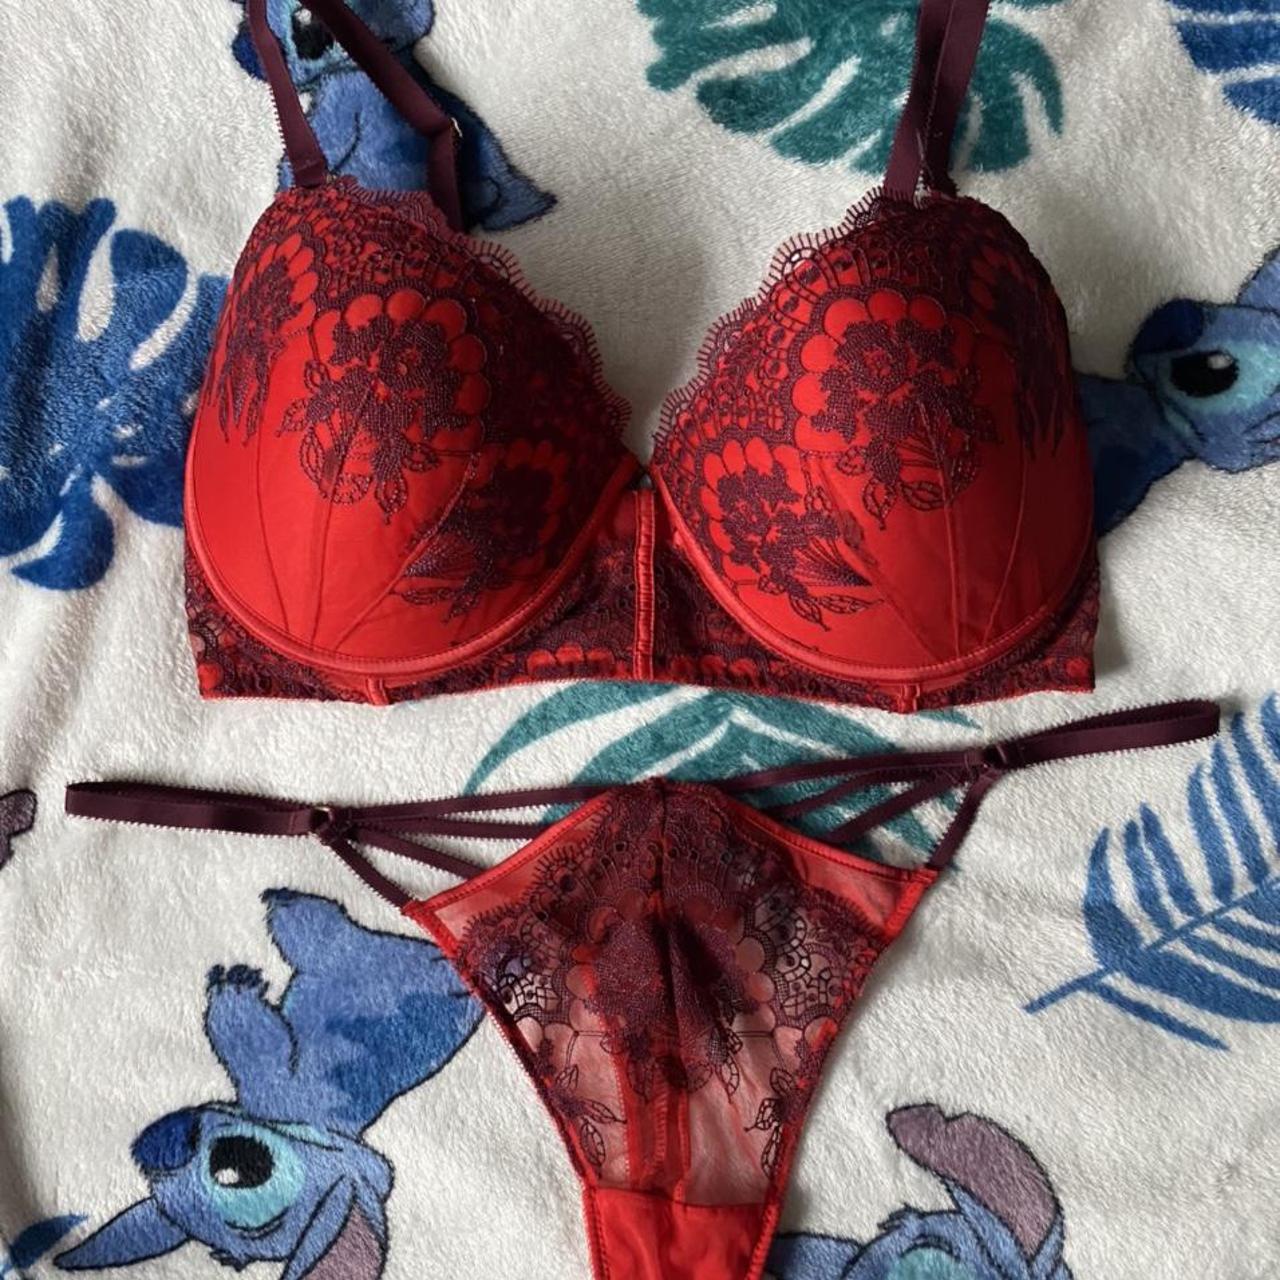 Red and maroon embroidered Lingerie set by - Depop